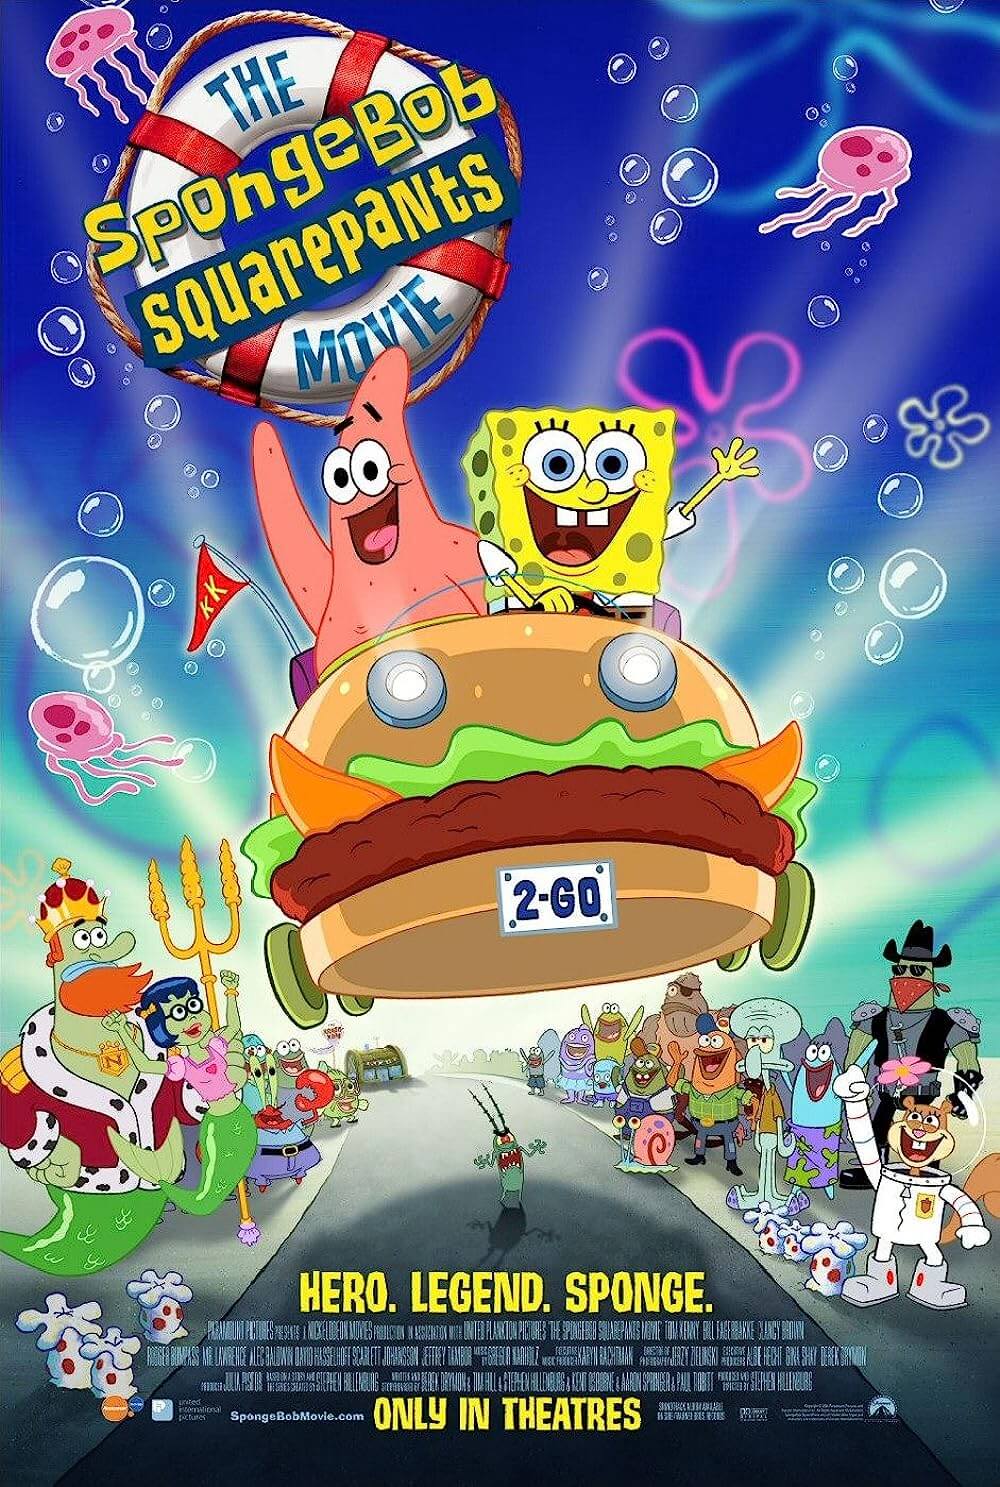 Watch The Spongebob Squarepants Movie, one of the best movies for 6 year olds on Netflix.